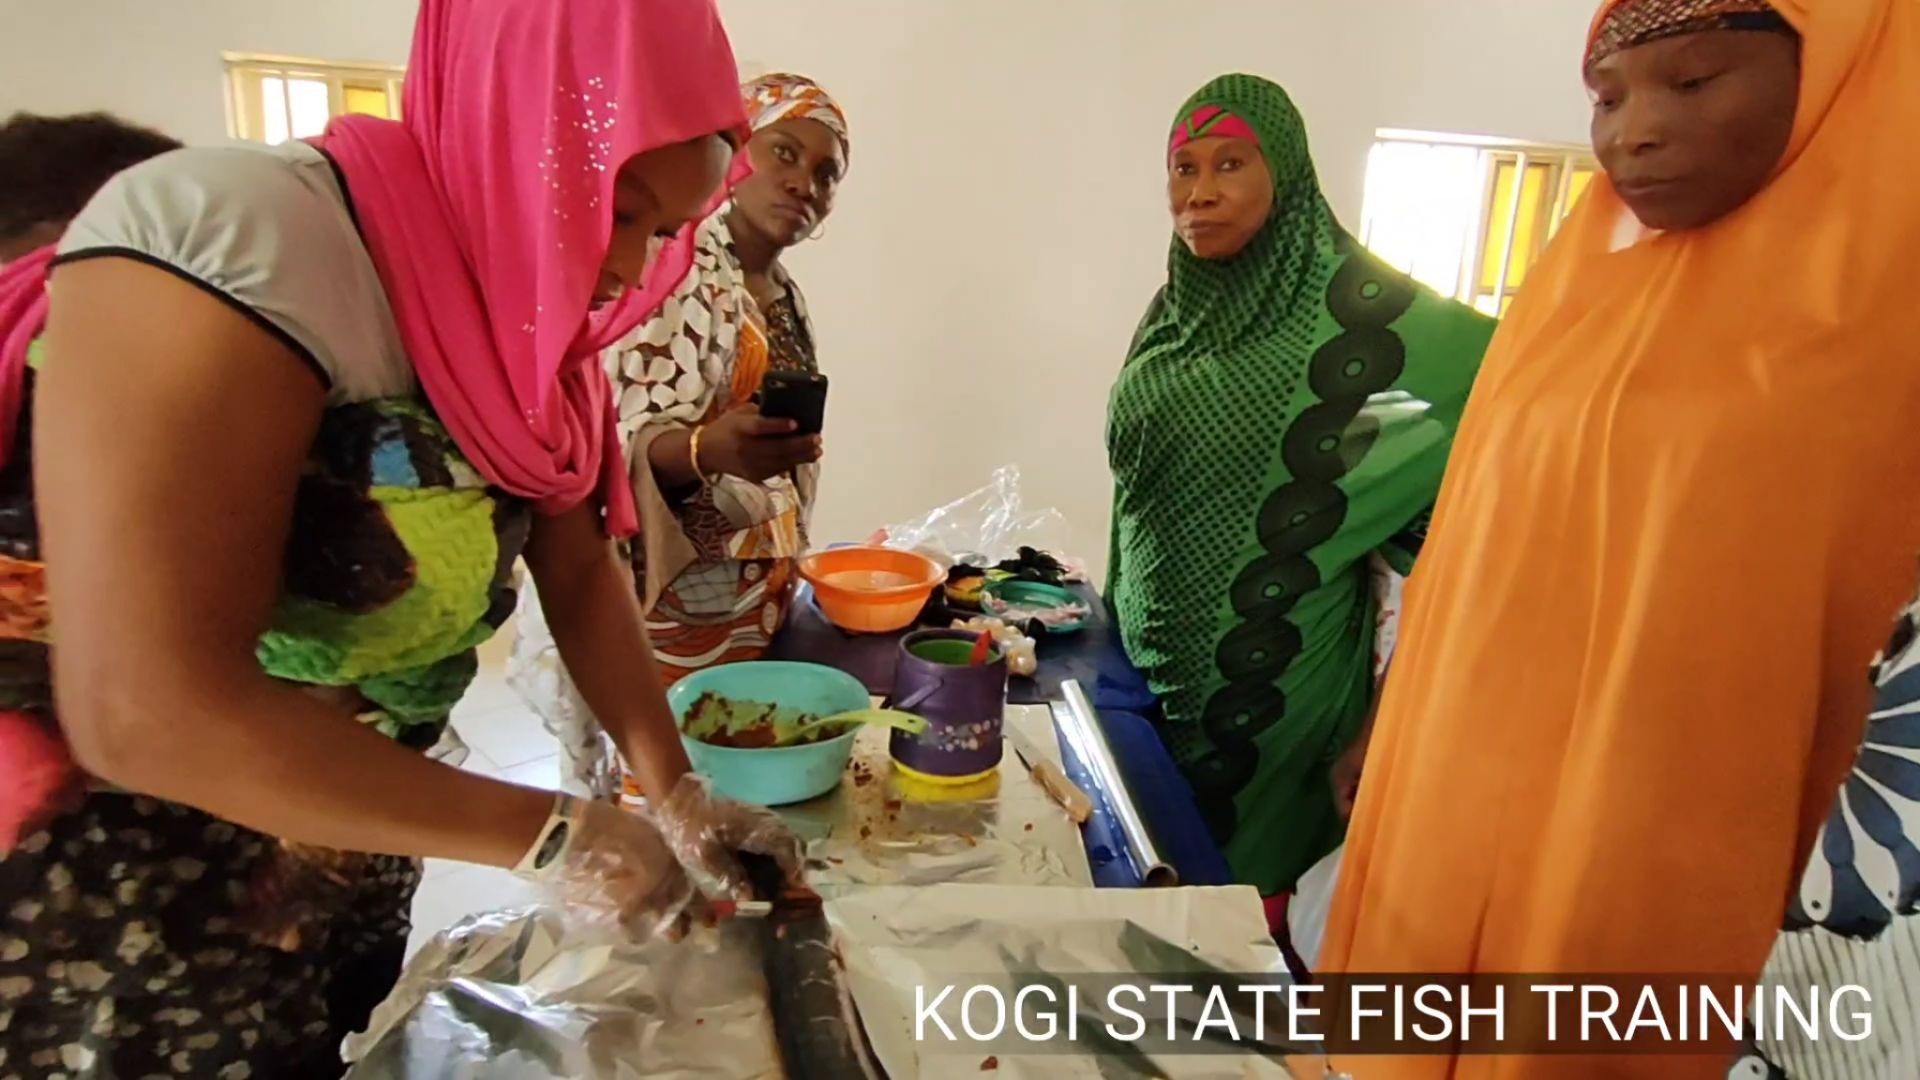 Kogi State - Practical Fish Farming Value Chain Training for Youth & Women - Nigeria